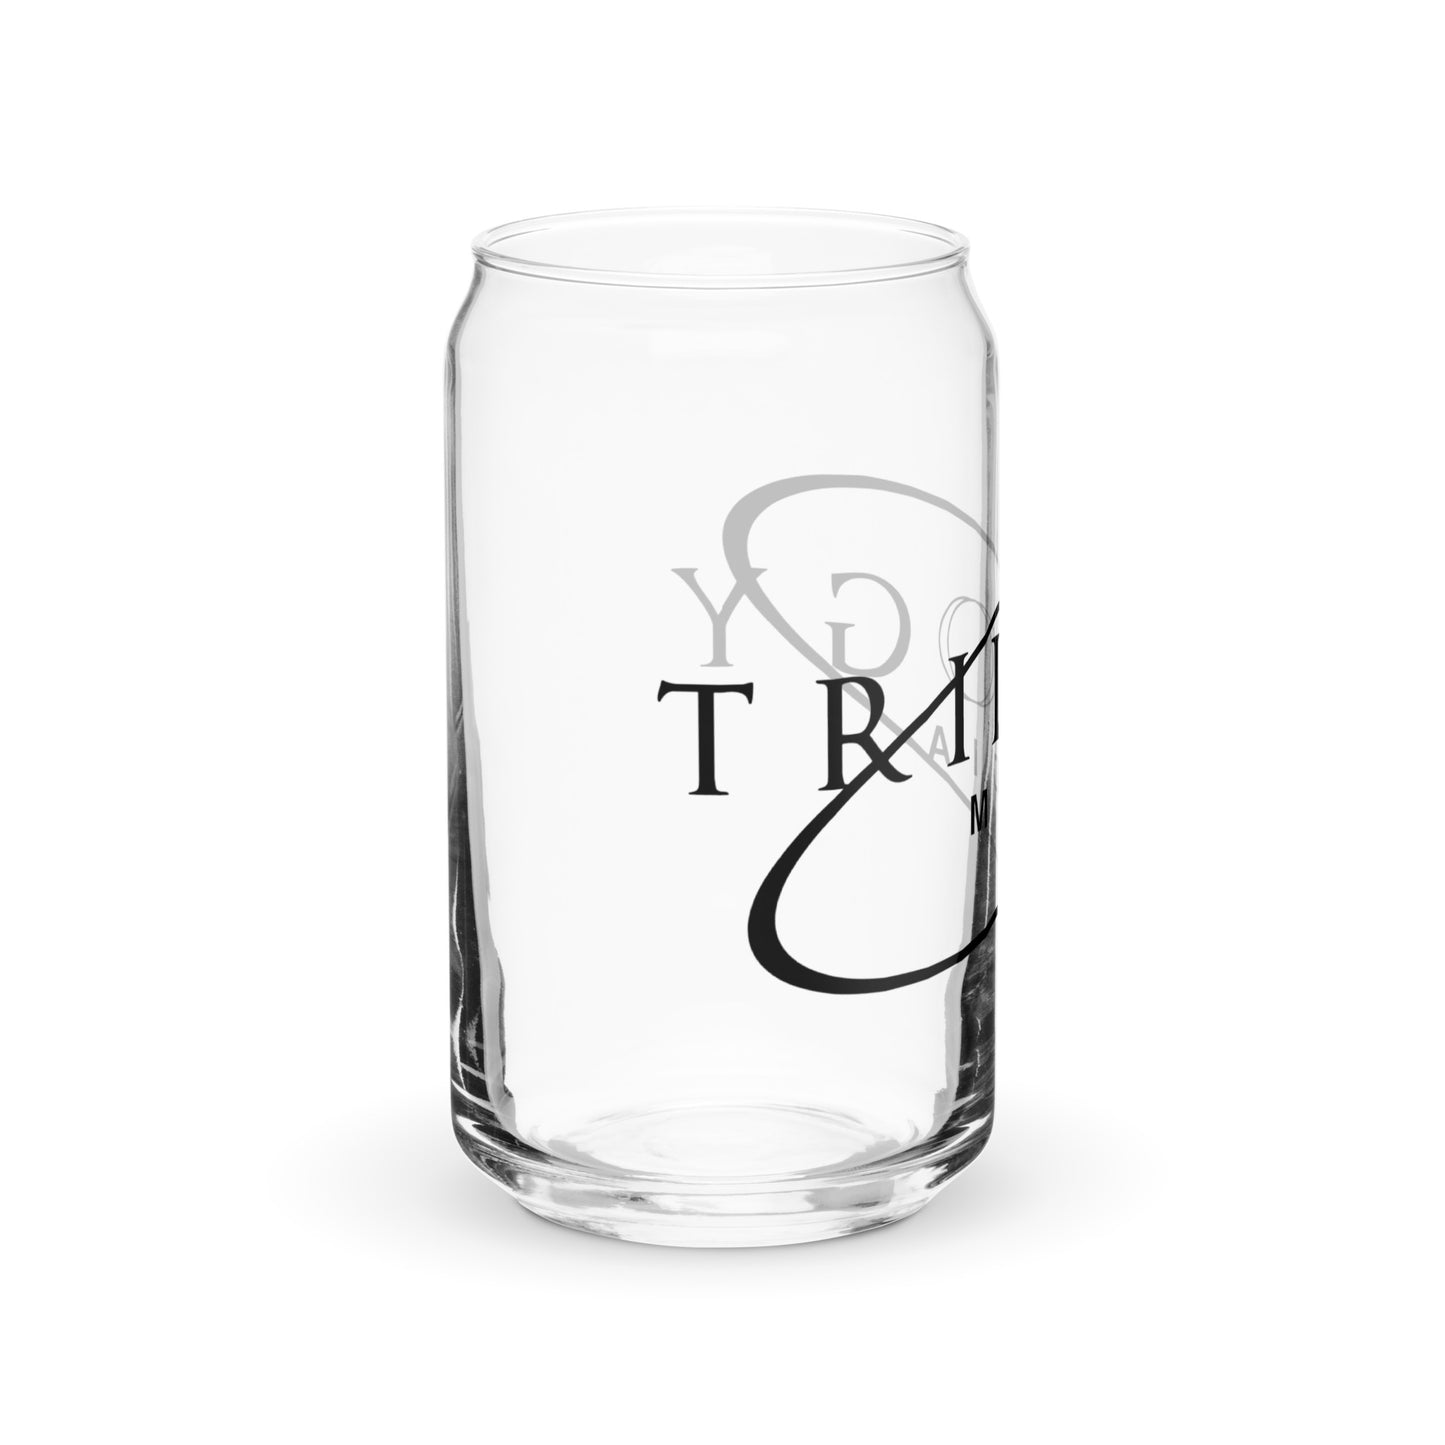 TRILOGY MEDIA LOGO | Can-shaped glass